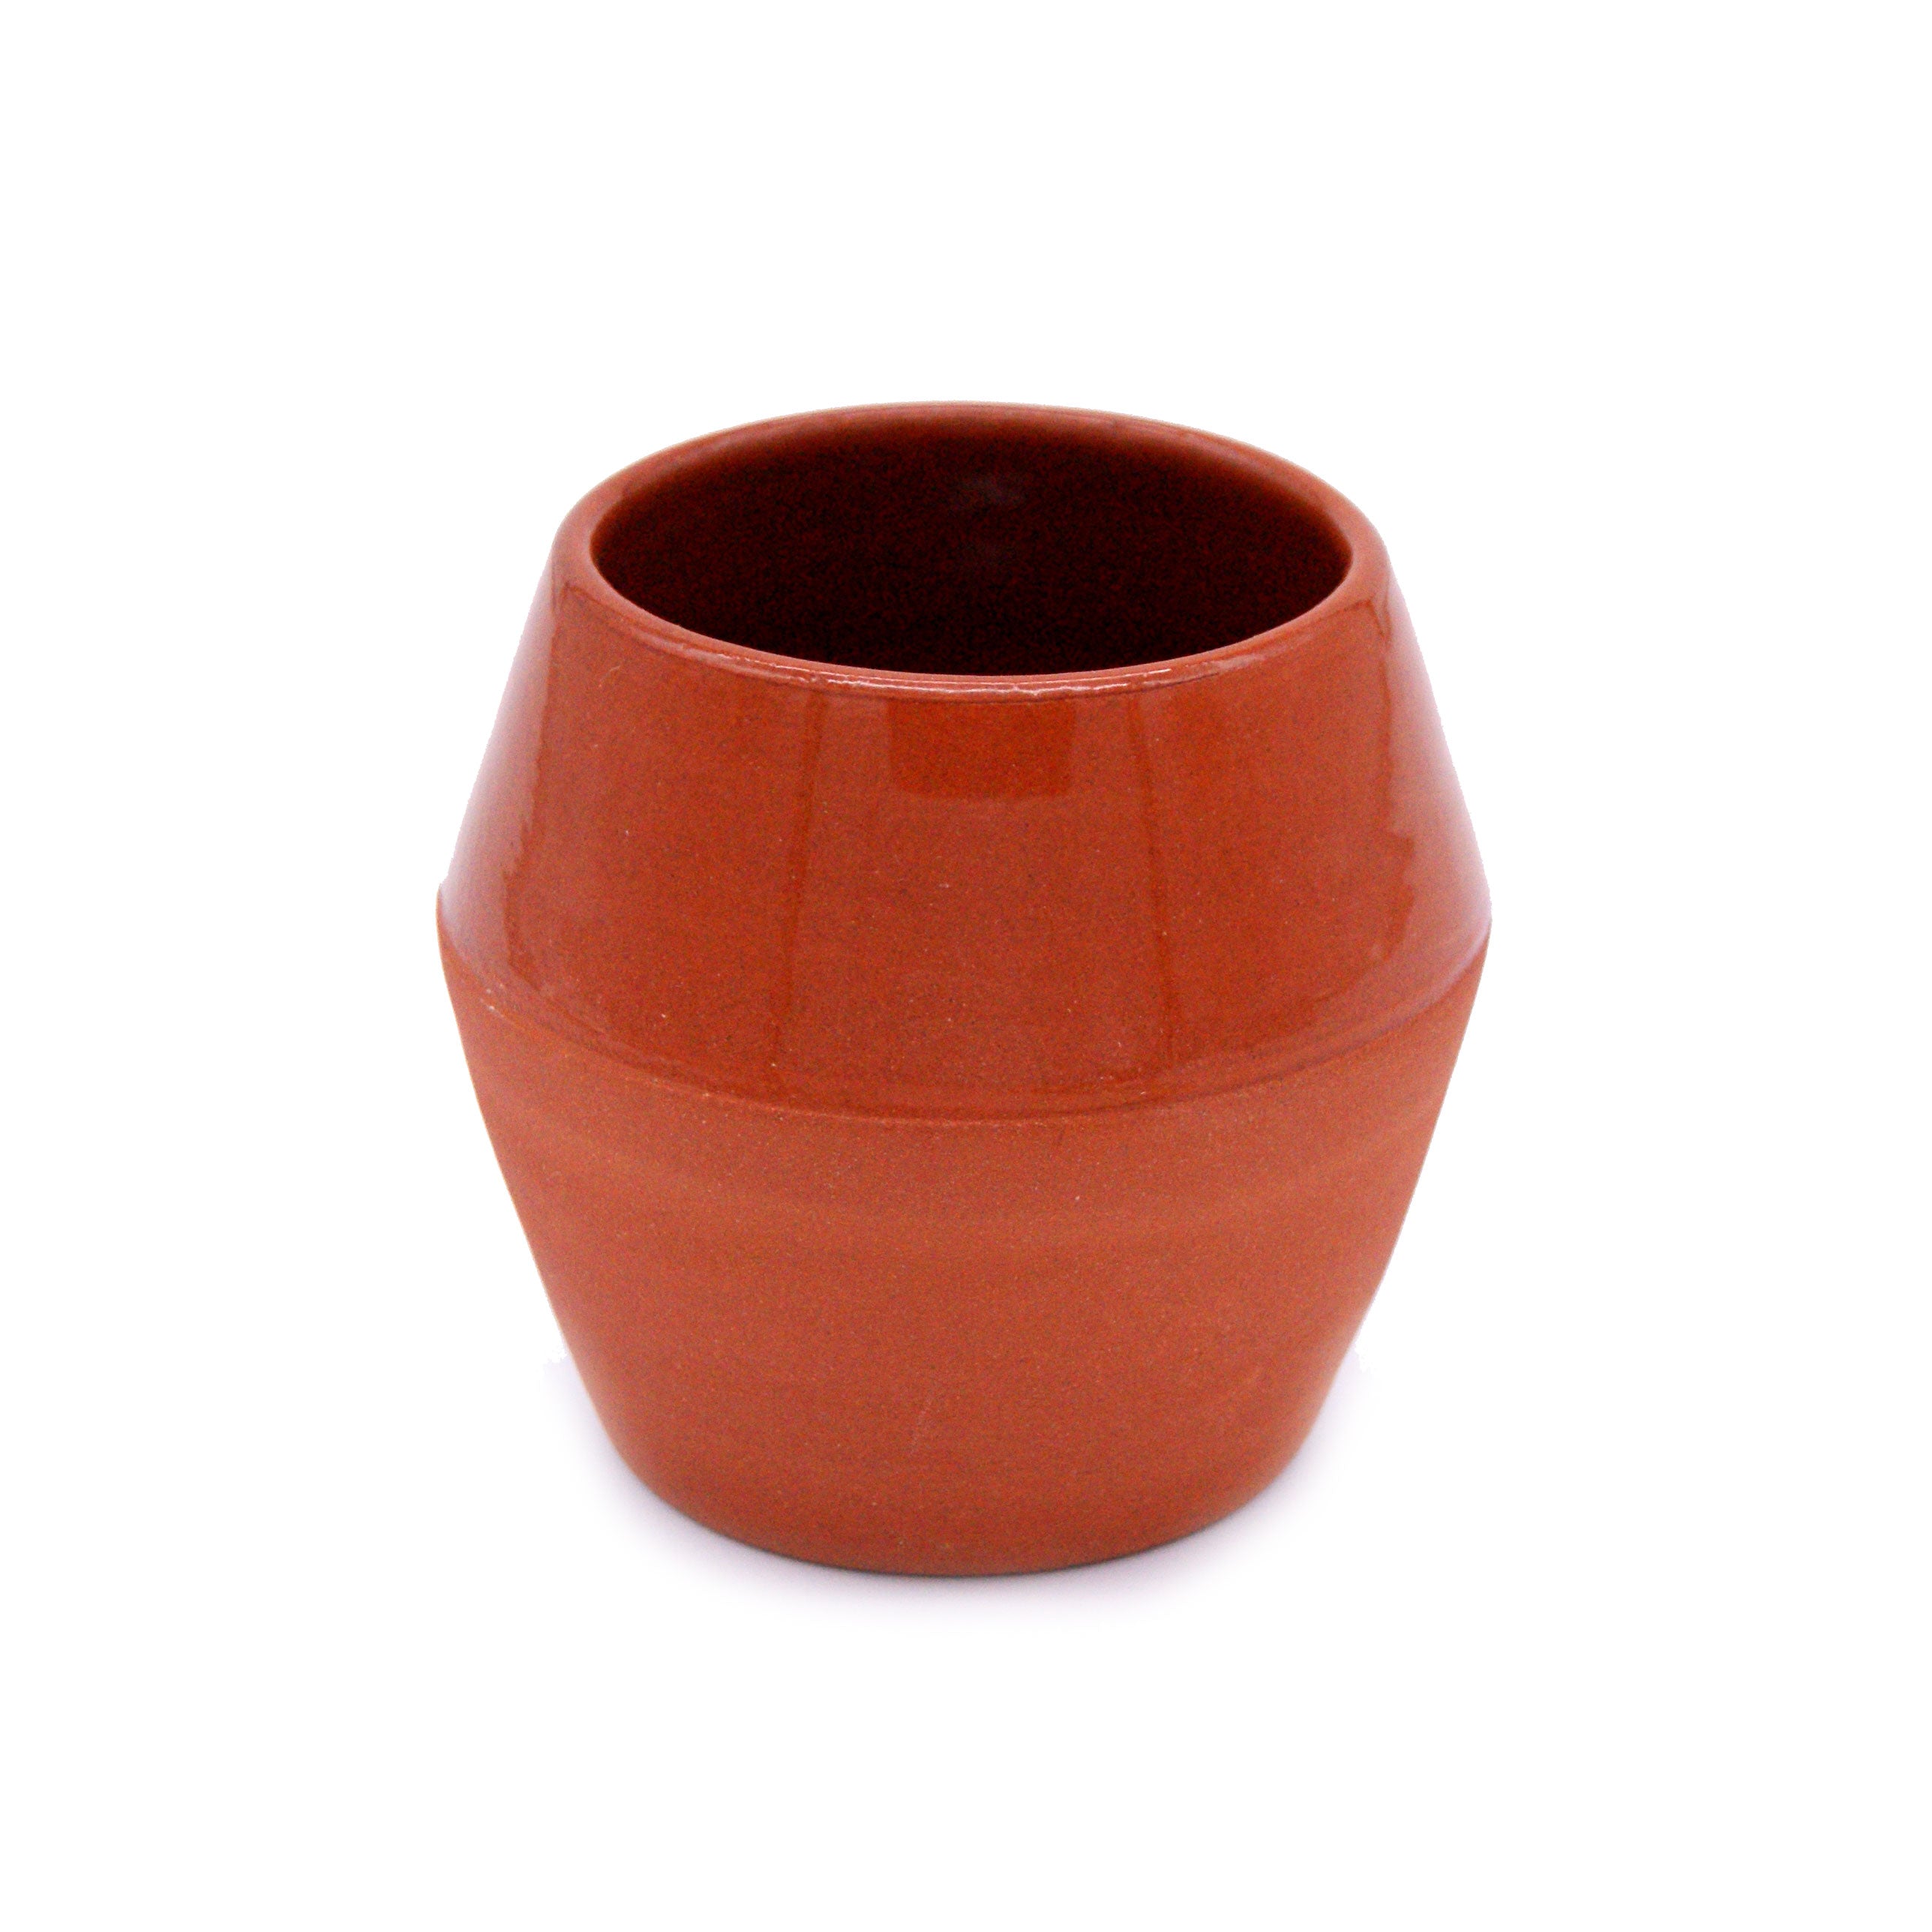 From the Tasco Collection by Vicara we bring you the Cachopo Cups.